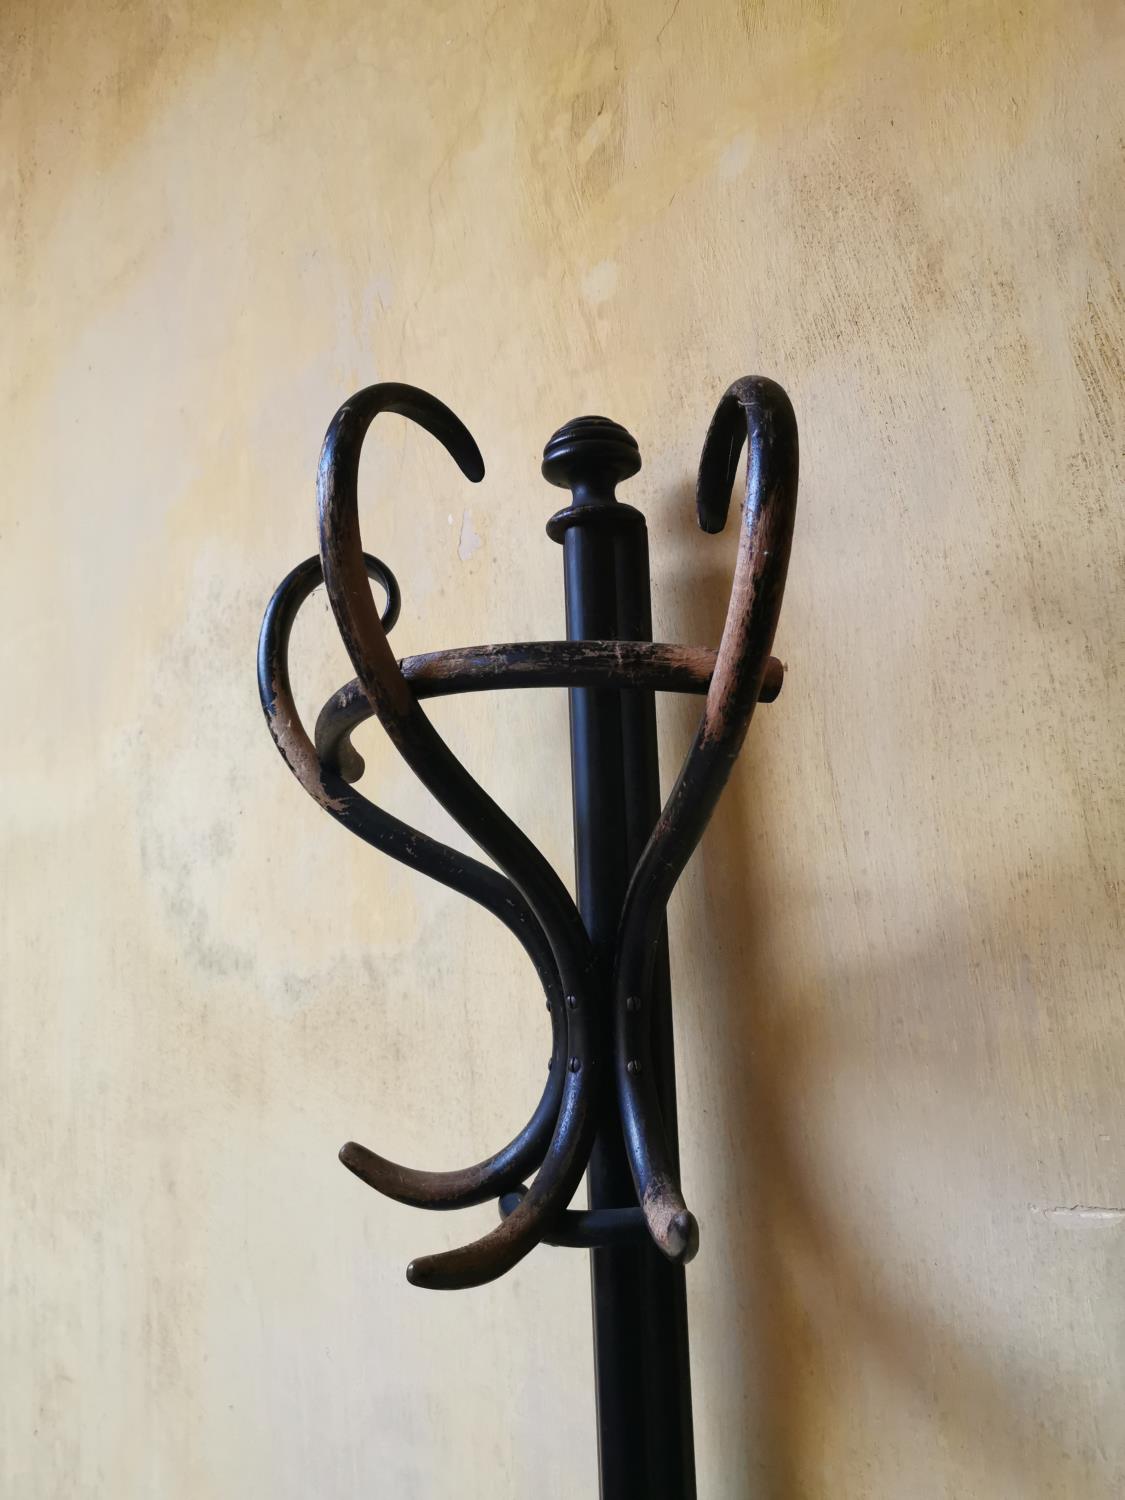 Bentwood coat stand. - Image 2 of 3